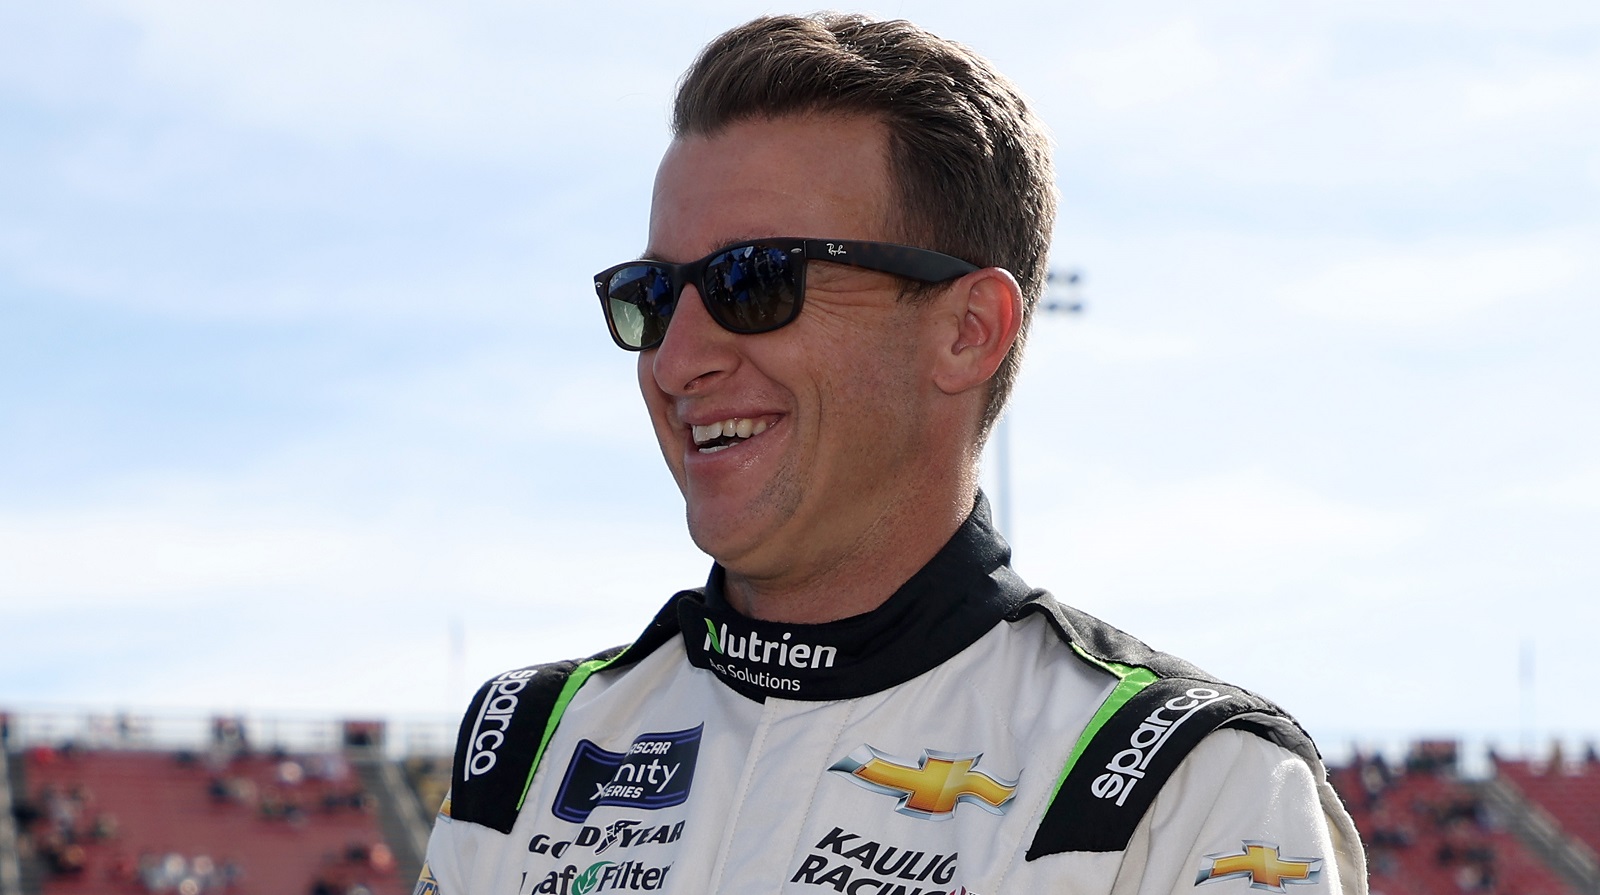 AJ Allmendinger laughs on the grid prior to the NASCAR Xfinity Series Production Alliance 300 at Auto Club Speedway on Feb. 26, 2022, in Fontana, California. | James Gilbert/Getty Images